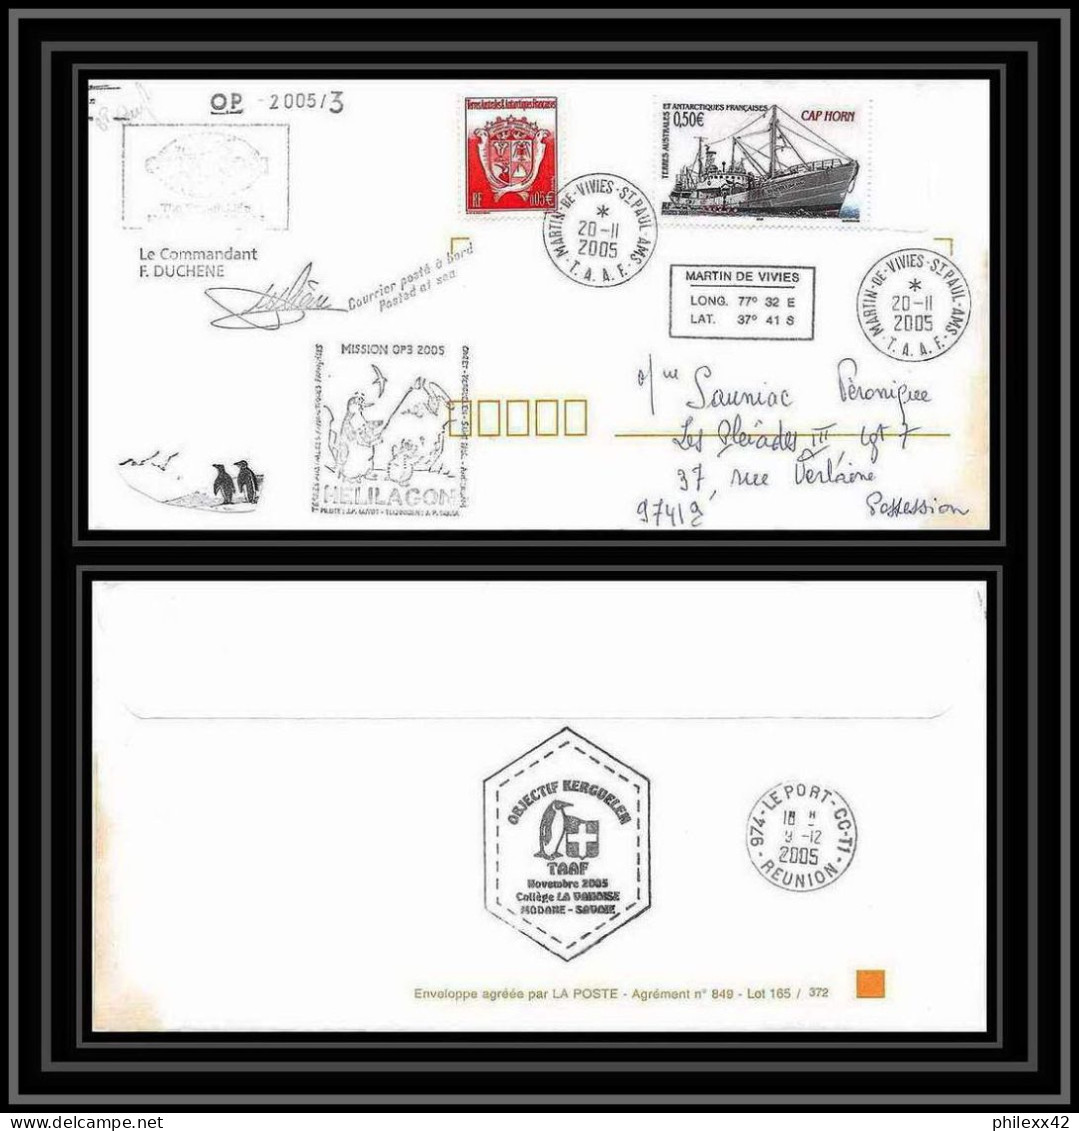 2538 ANTARCTIC Terres Australes TAAF Lettre Cover Dufresne 2 Signé Signed Op 2005/3 KERGUELEN 20/11/2005 N°407 Helilagon - Helicopters